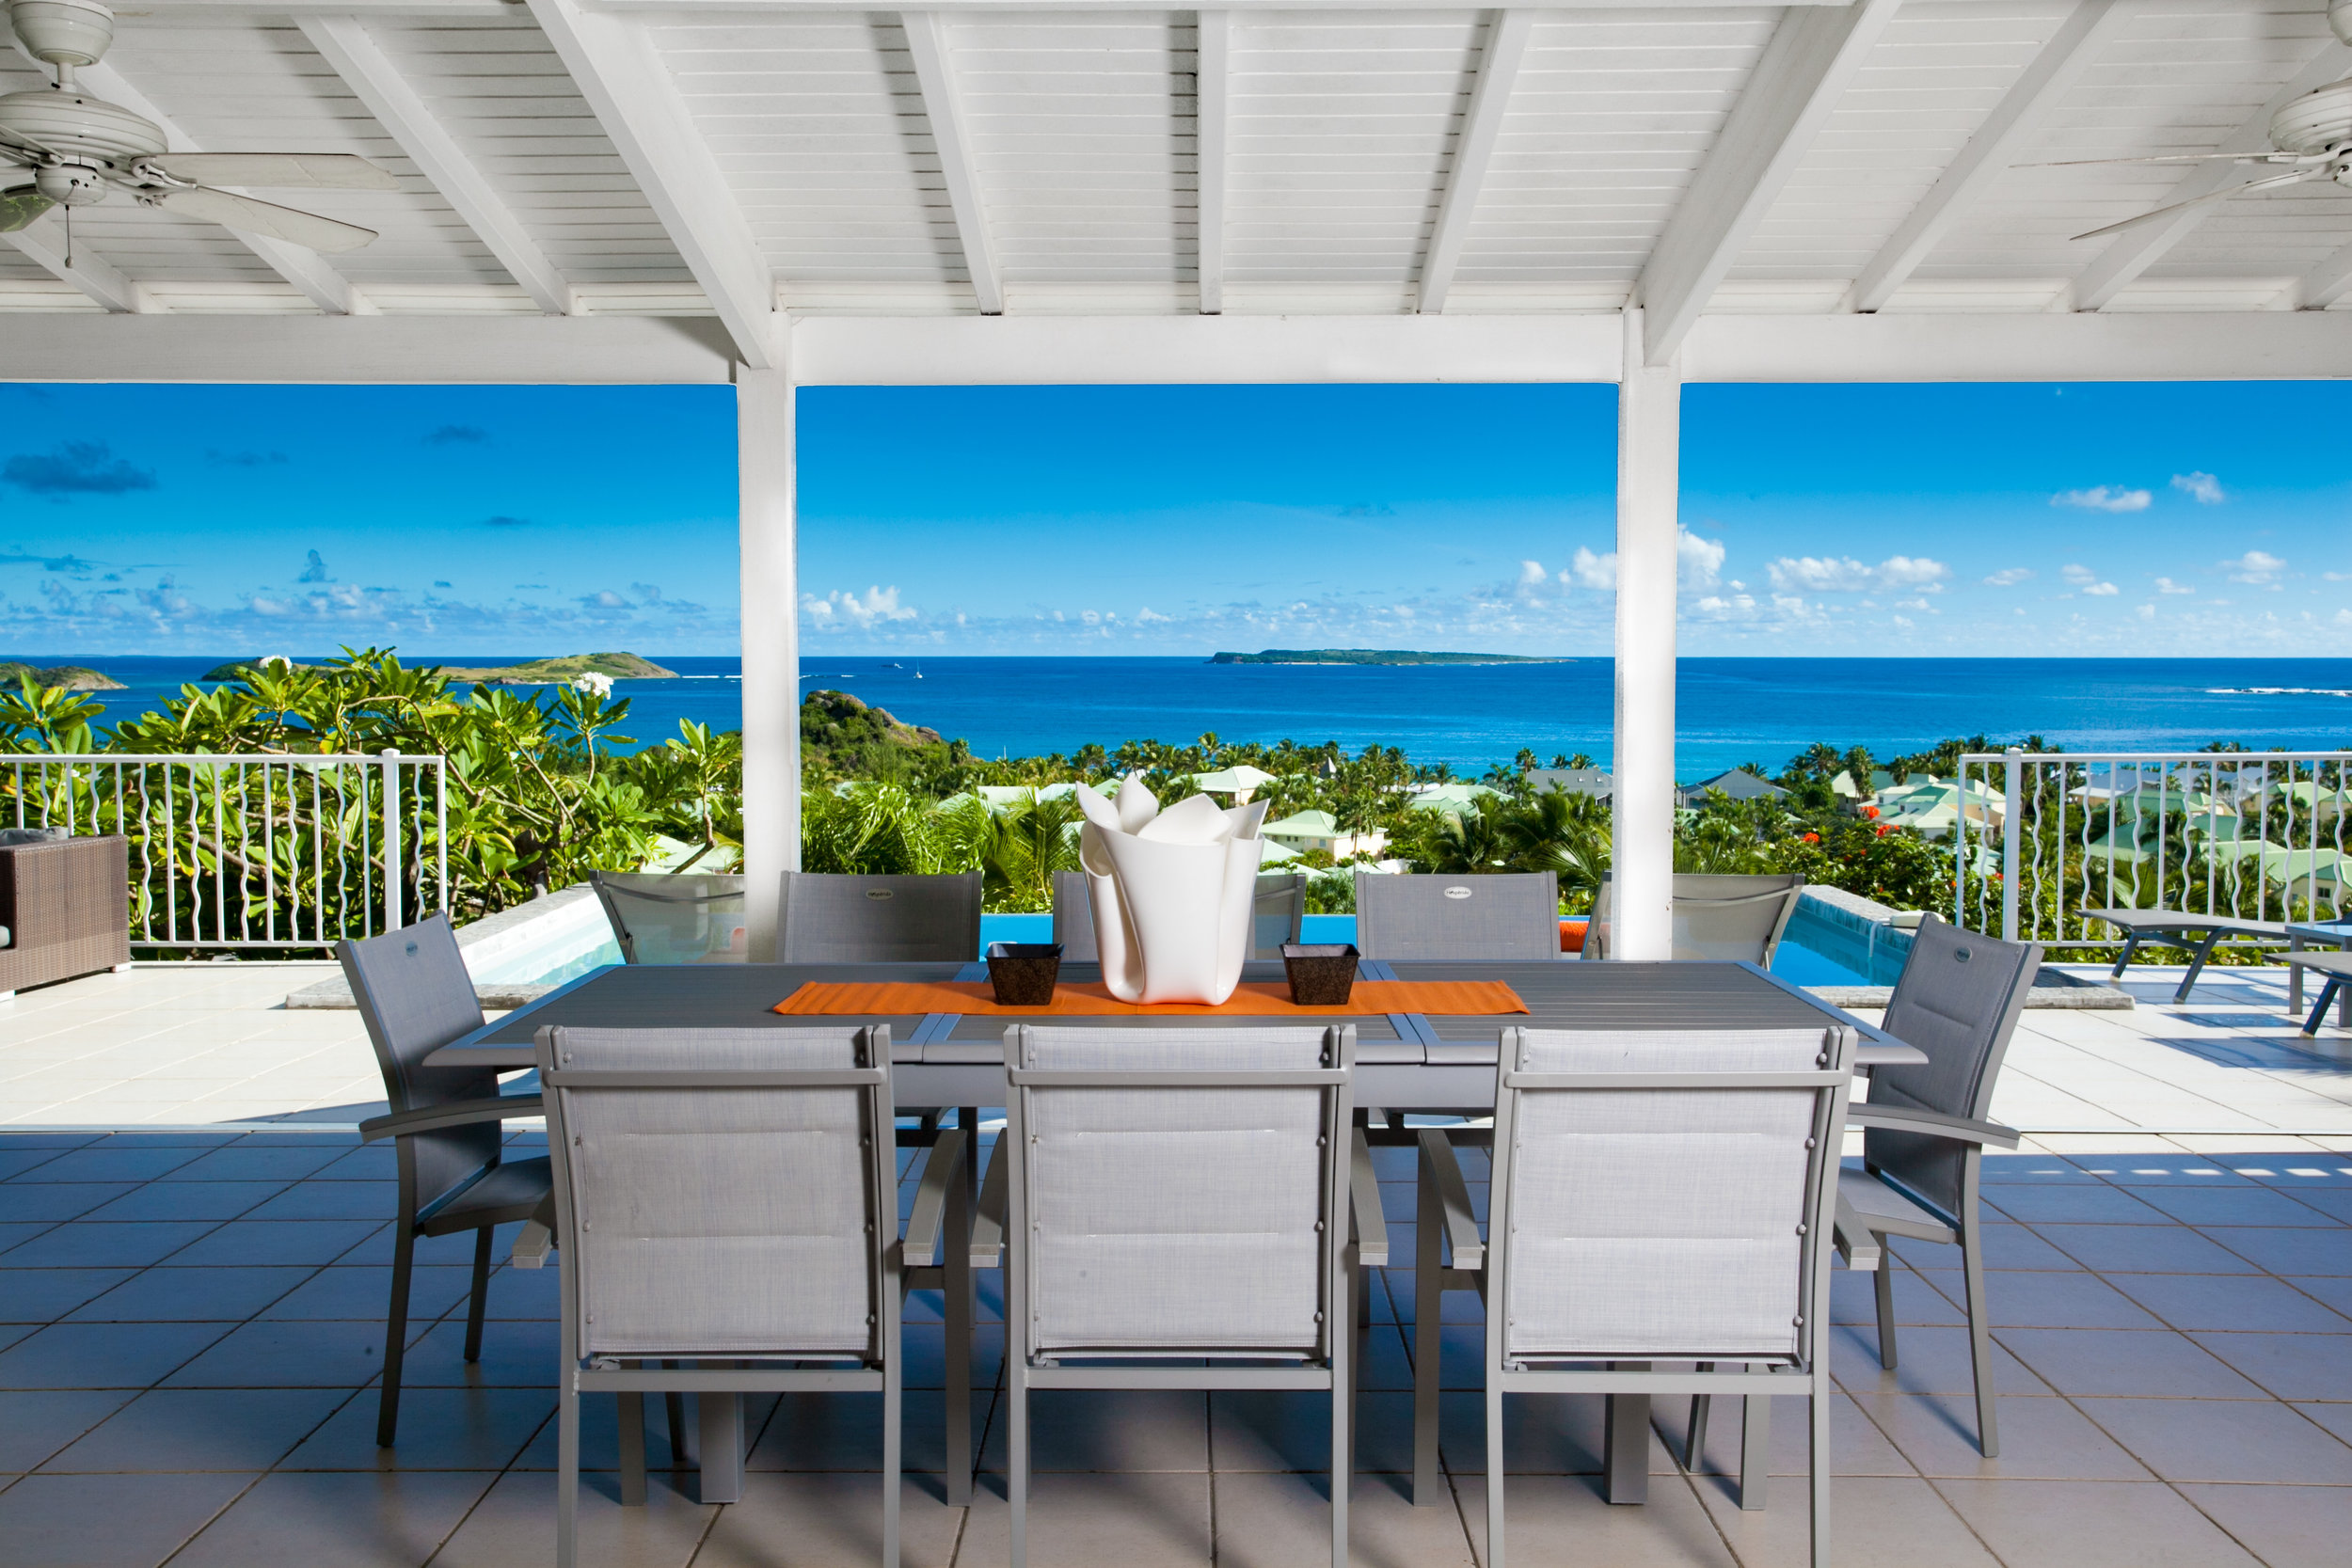 Covered outside dining area with sea view.jpg